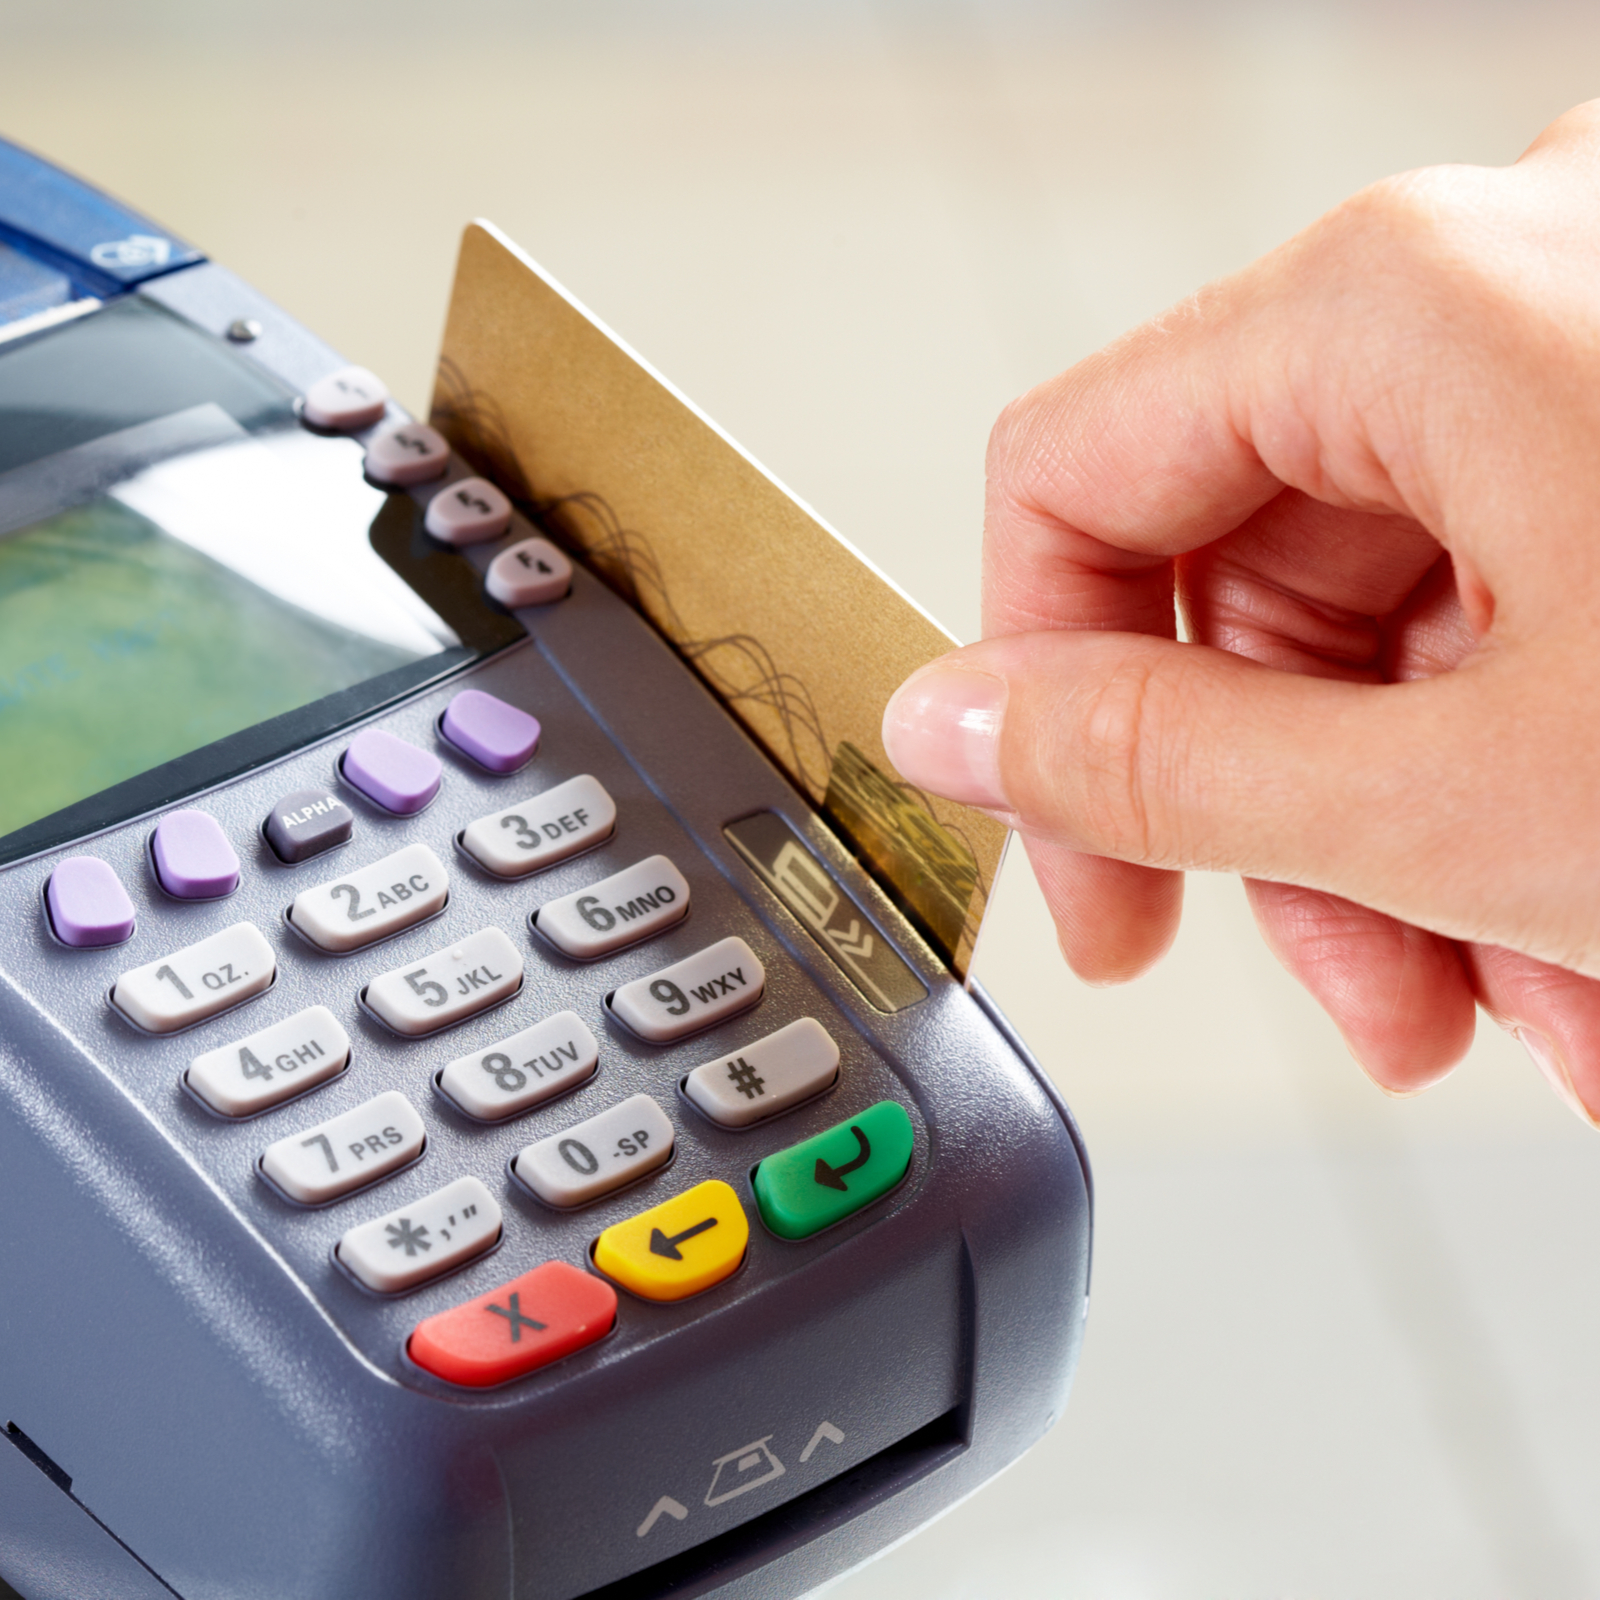 SBI Doesn't Ban Credit Card Crypto Purchases Despite Issuing Warning